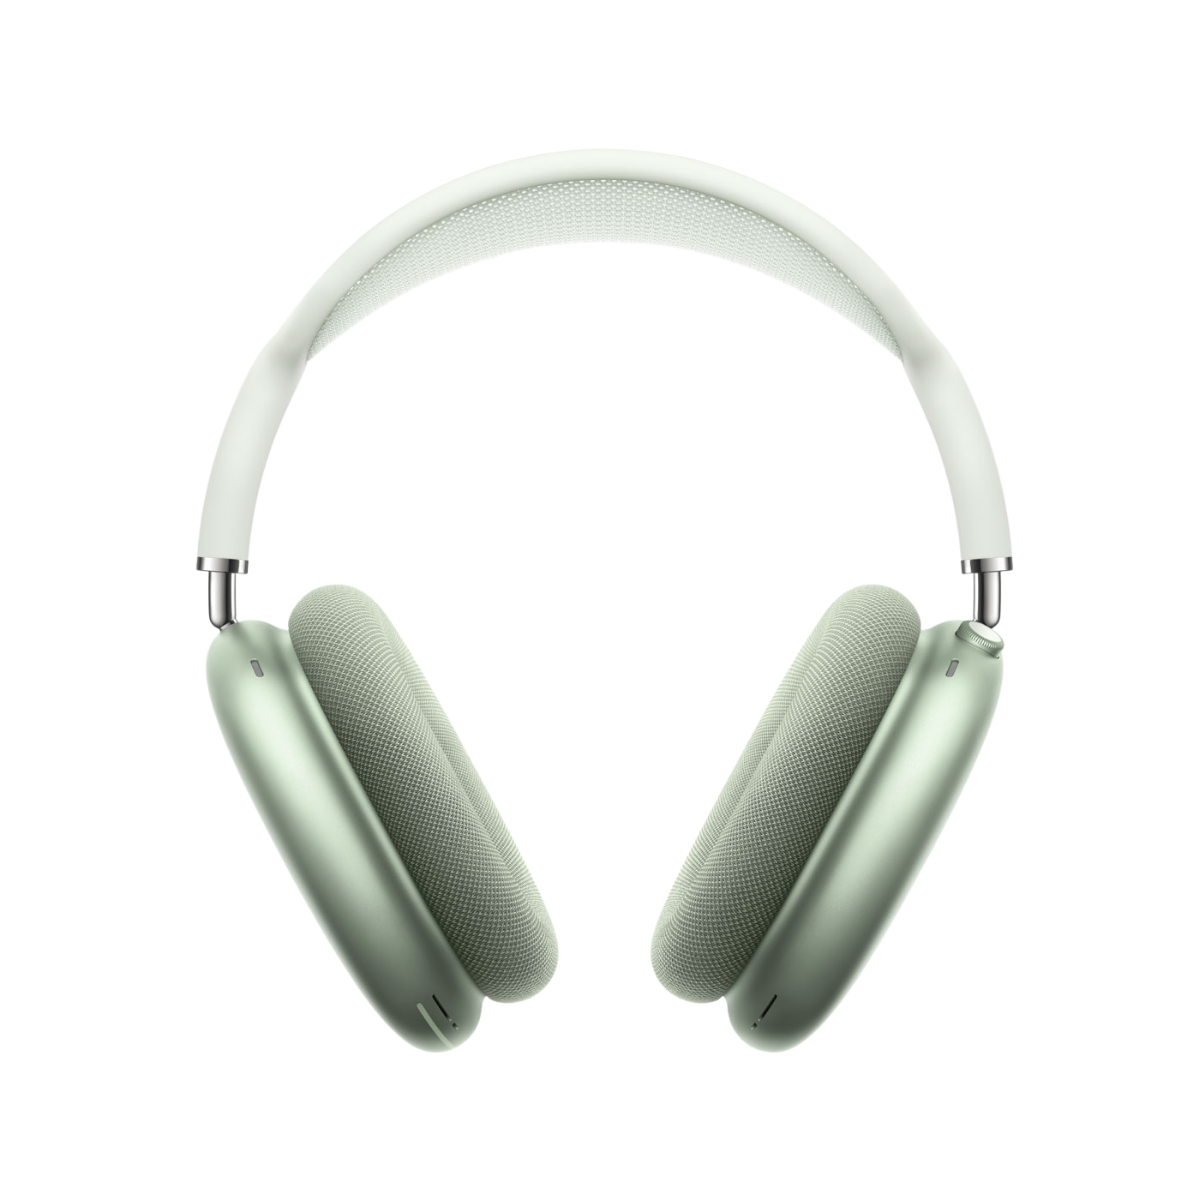 Upgrade their sound by replacing their barely alive earbuds with these slick, noise-canceling, Bluetooth-enabled headphones. $549, Amazon. <a href="https://www.amazon.com/New-Apple-AirPods-Max-Green/dp/B08PZDSP2Z/">Get it now!</a>